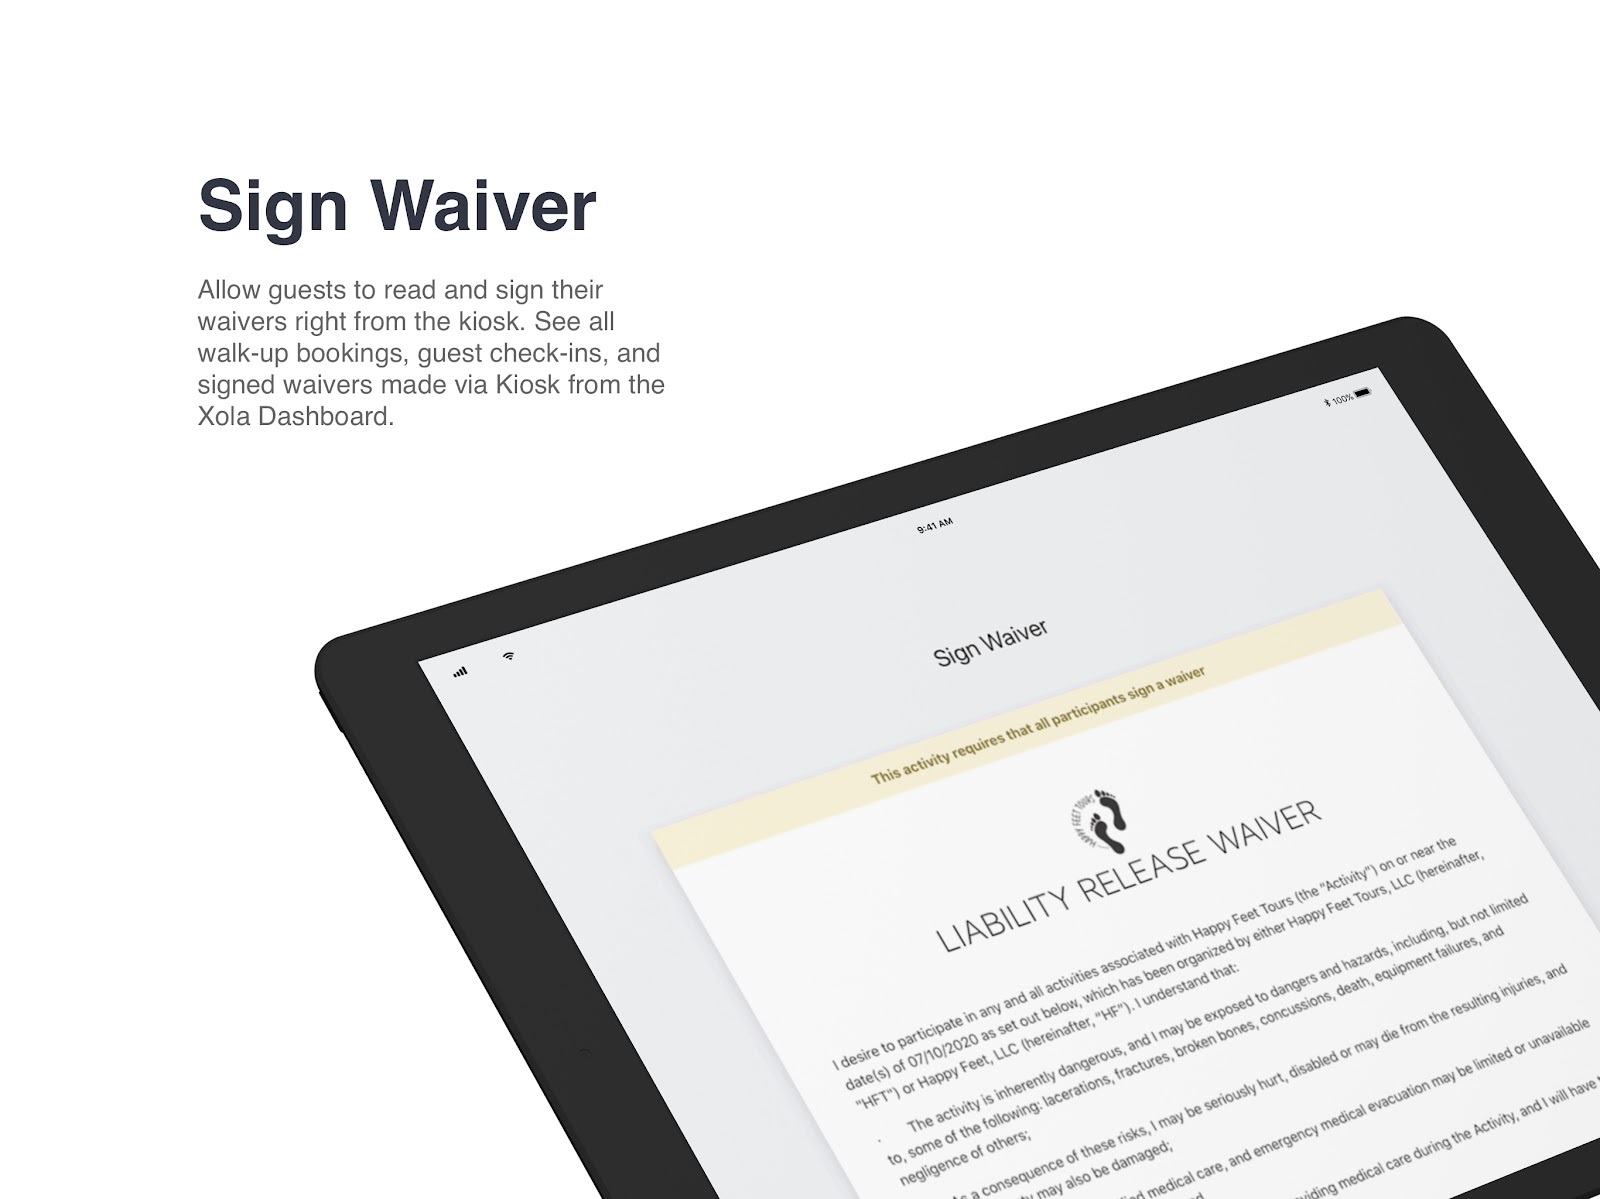 Sign waiver in ipad